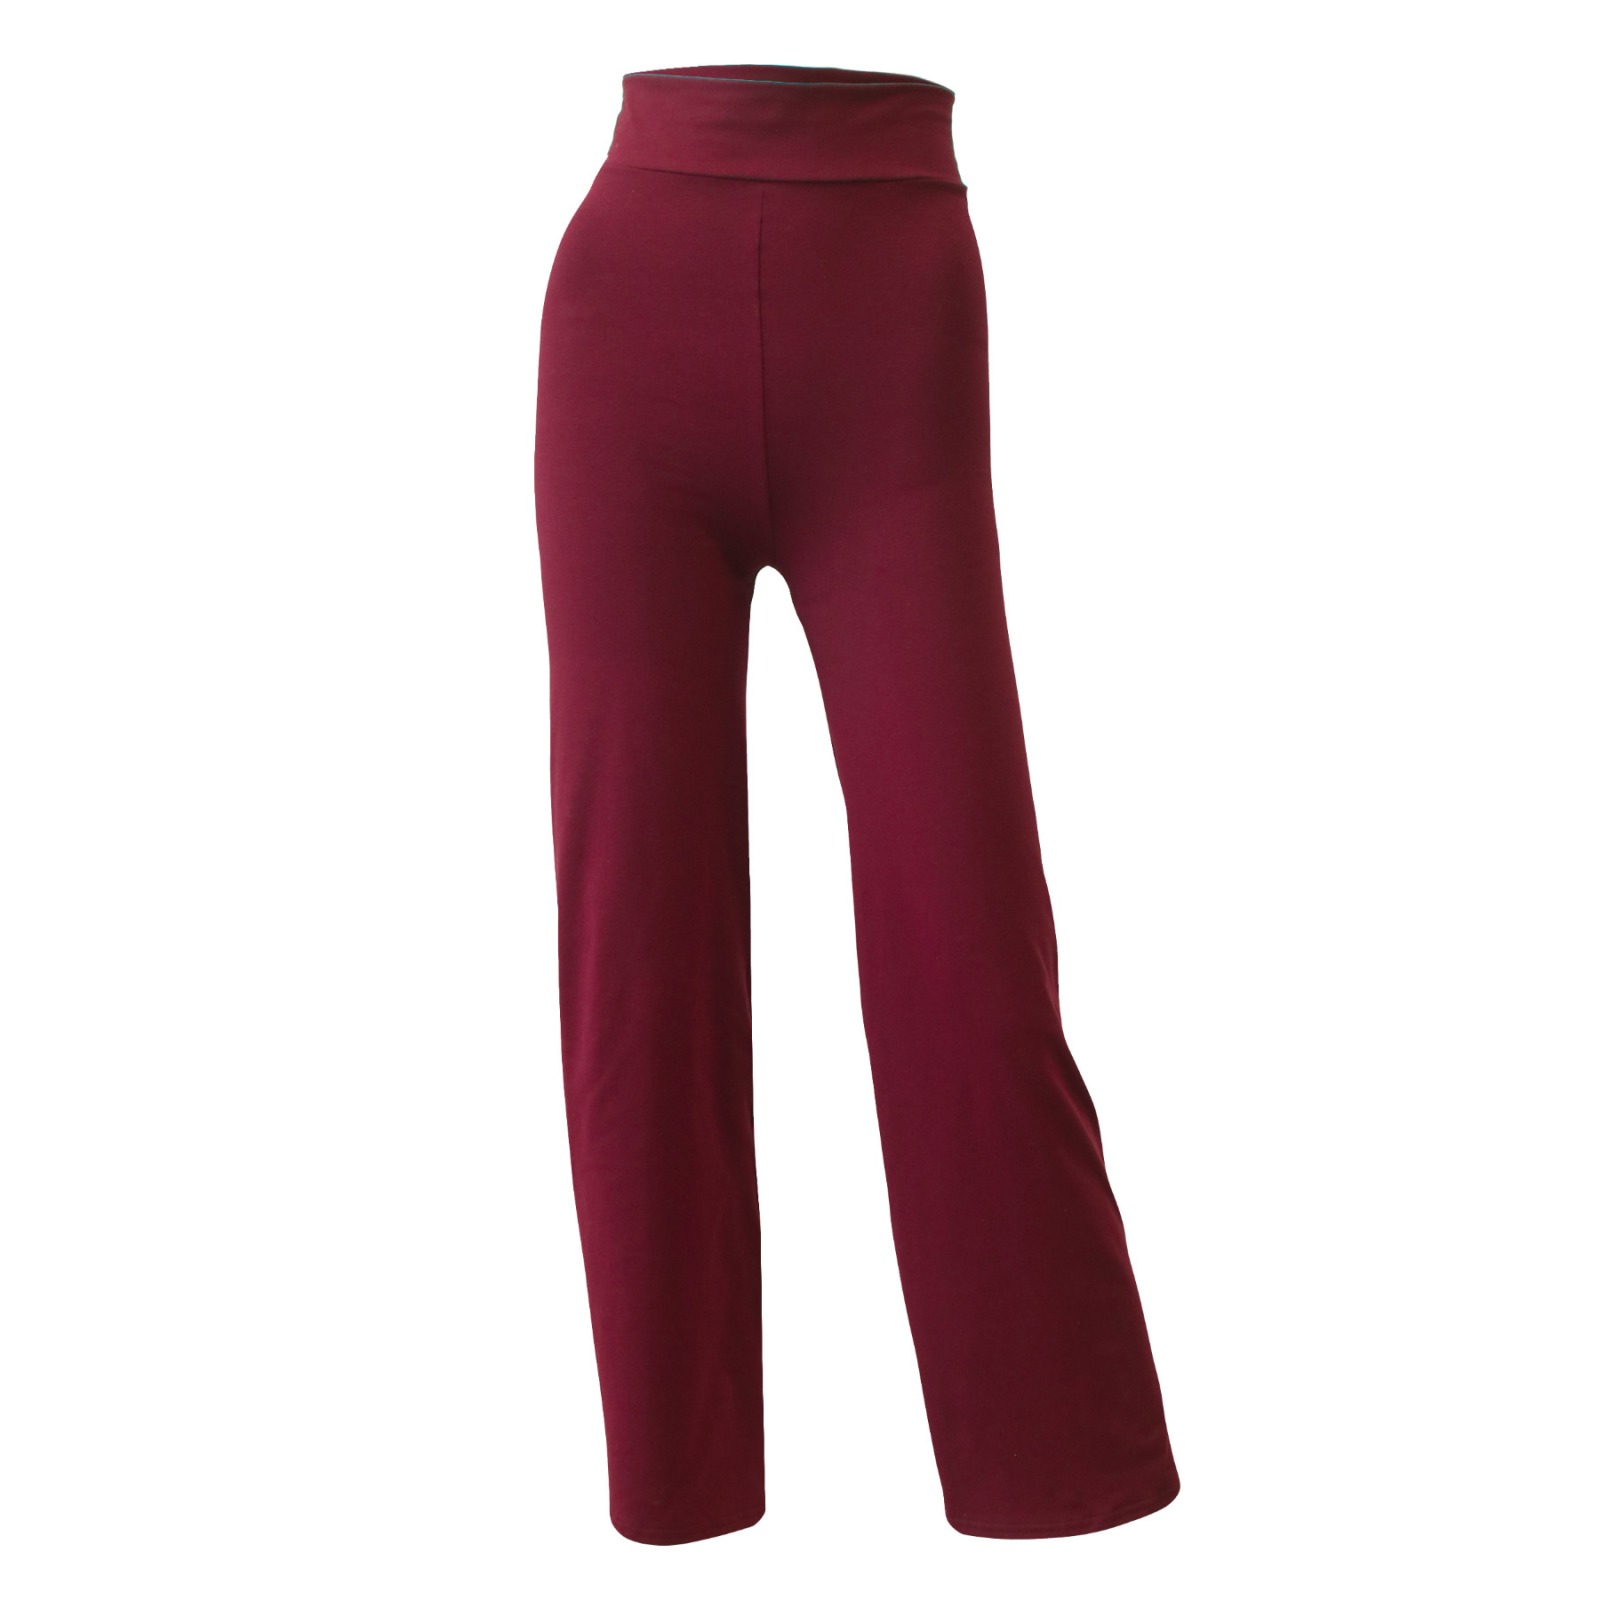 Yoga pants Relaxed Fit aubergine red